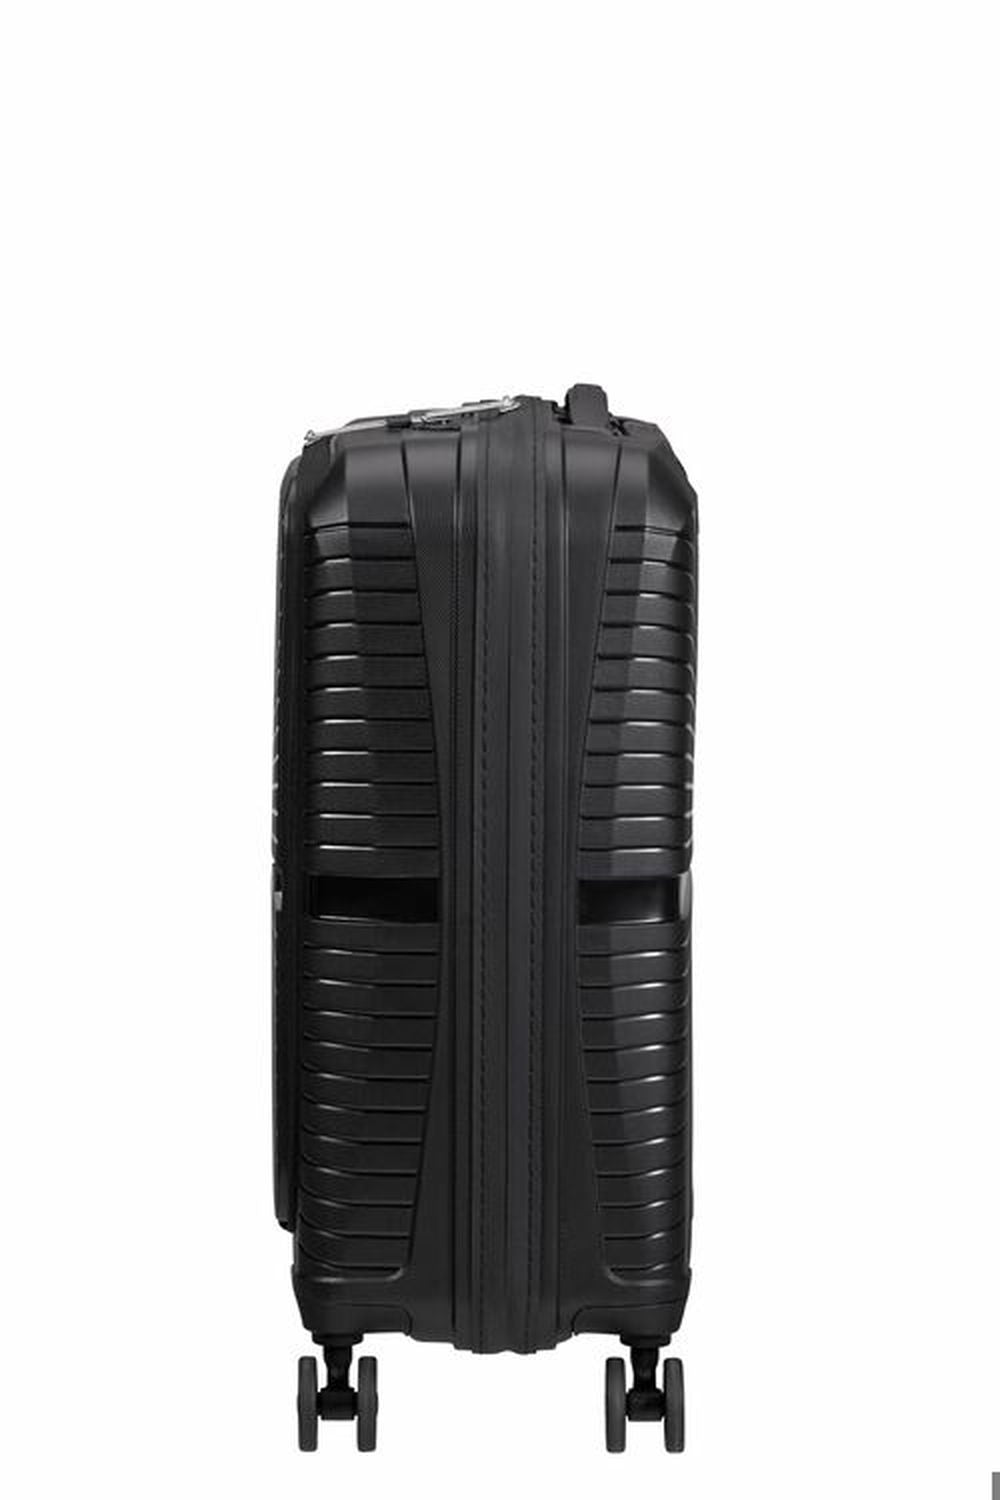 American Tourister Airconic 55 cm 4 Wheel Front Loading Carry-On Spinner - Onyx Black - rainbowbags